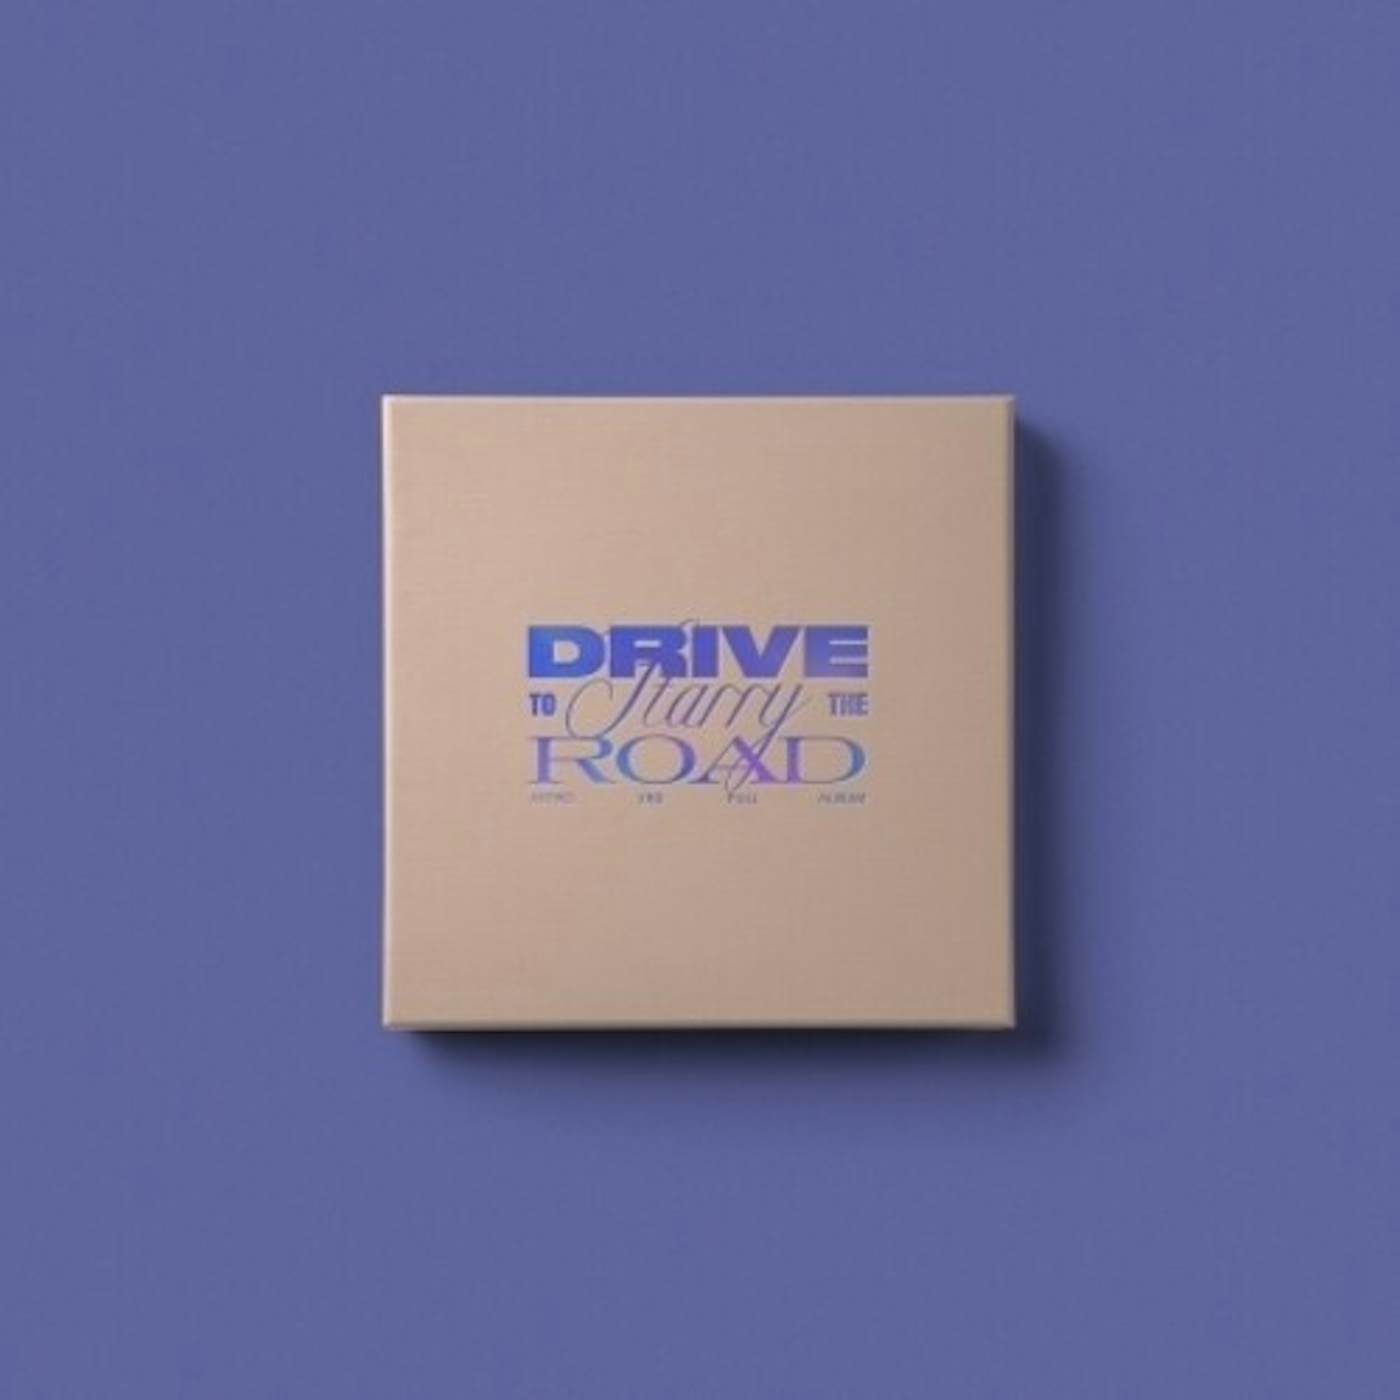 ASTRO DRIVE TO THE STARRY ROAD (ROAD VER.) CD